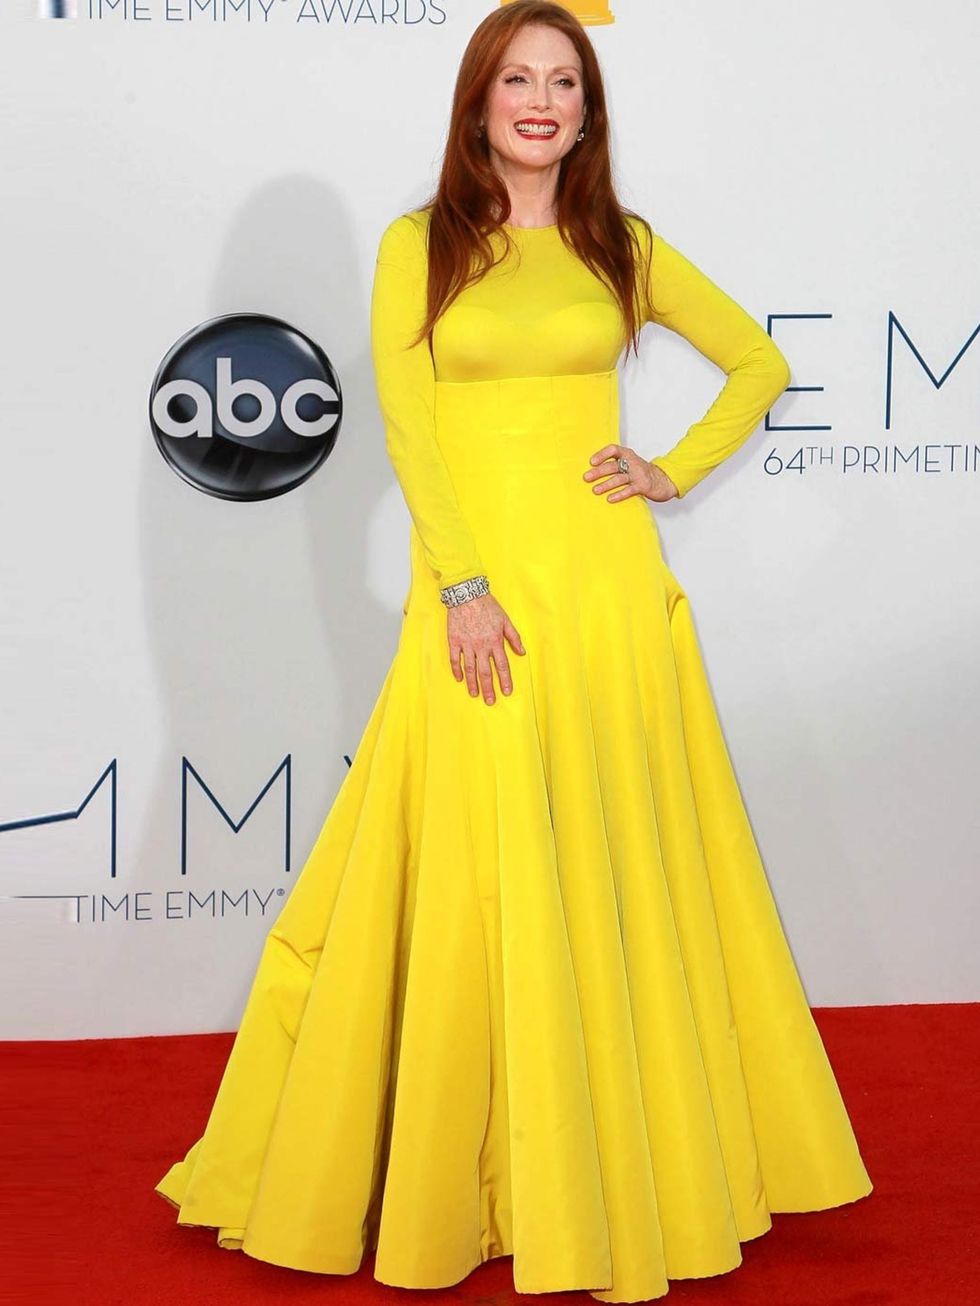 <p>Julianne Moore wore a <a href="http://www.elleuk.com/catwalk/designer-a-z/christian-dior/couture-aw-2012">Christian Dior</a> dress with <a href="http://www.elleuk.com/content/search?SearchText=jimmy+choo&amp;SearchButto">Jimmy Choo</a> heels on the red